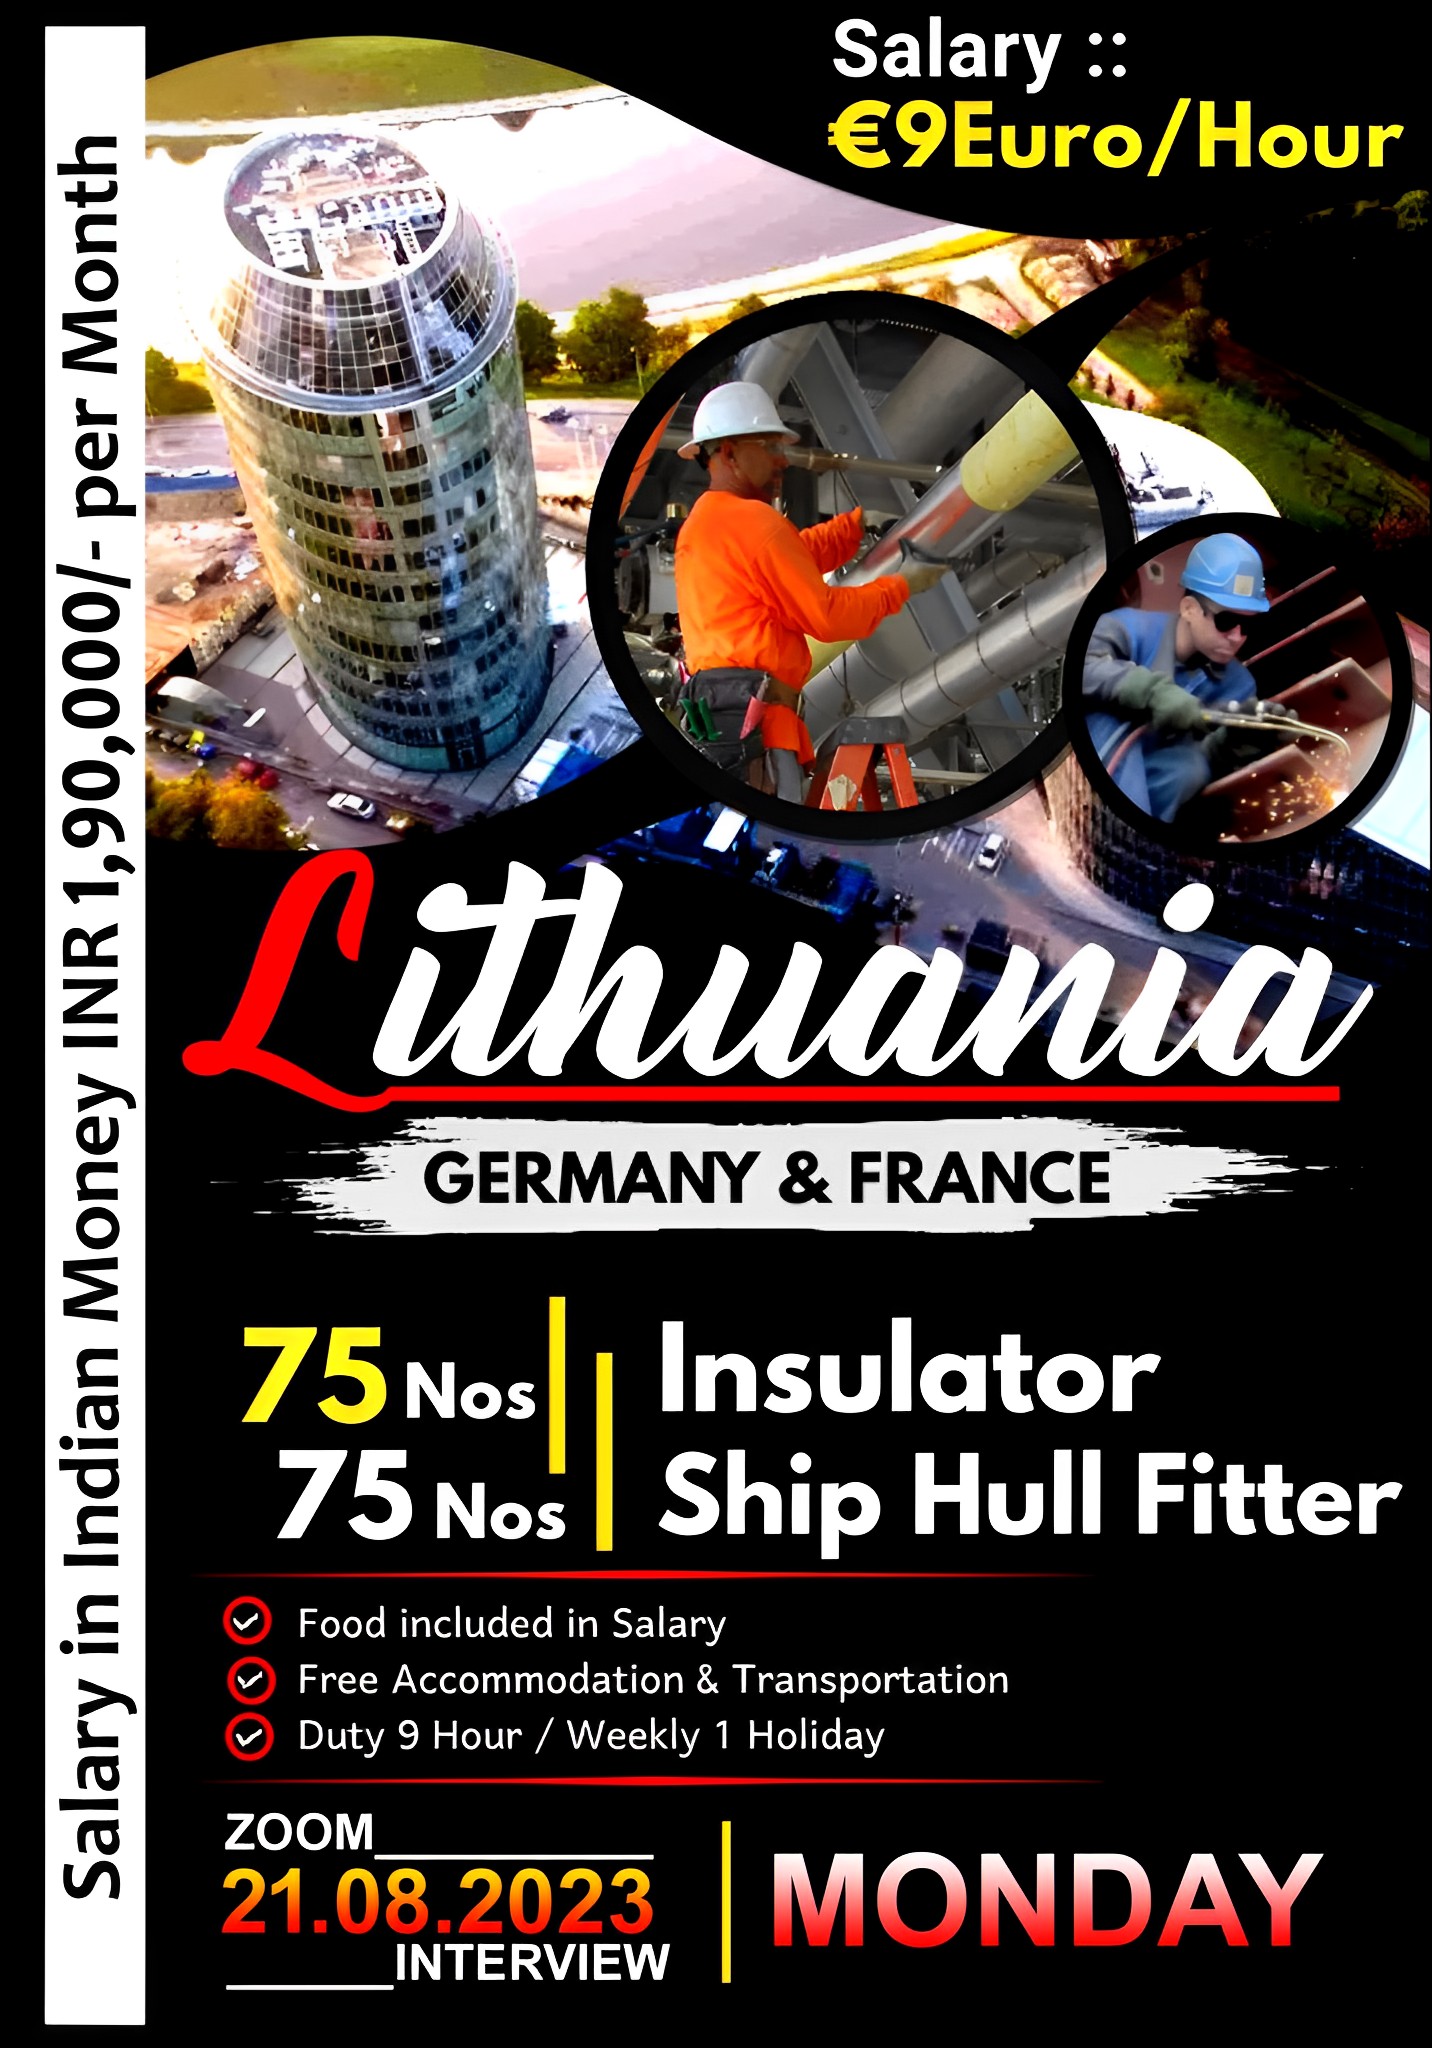 LITHUANIA-GERMANY & FRANCE VACANCY | ATTRACTIVE SALARY